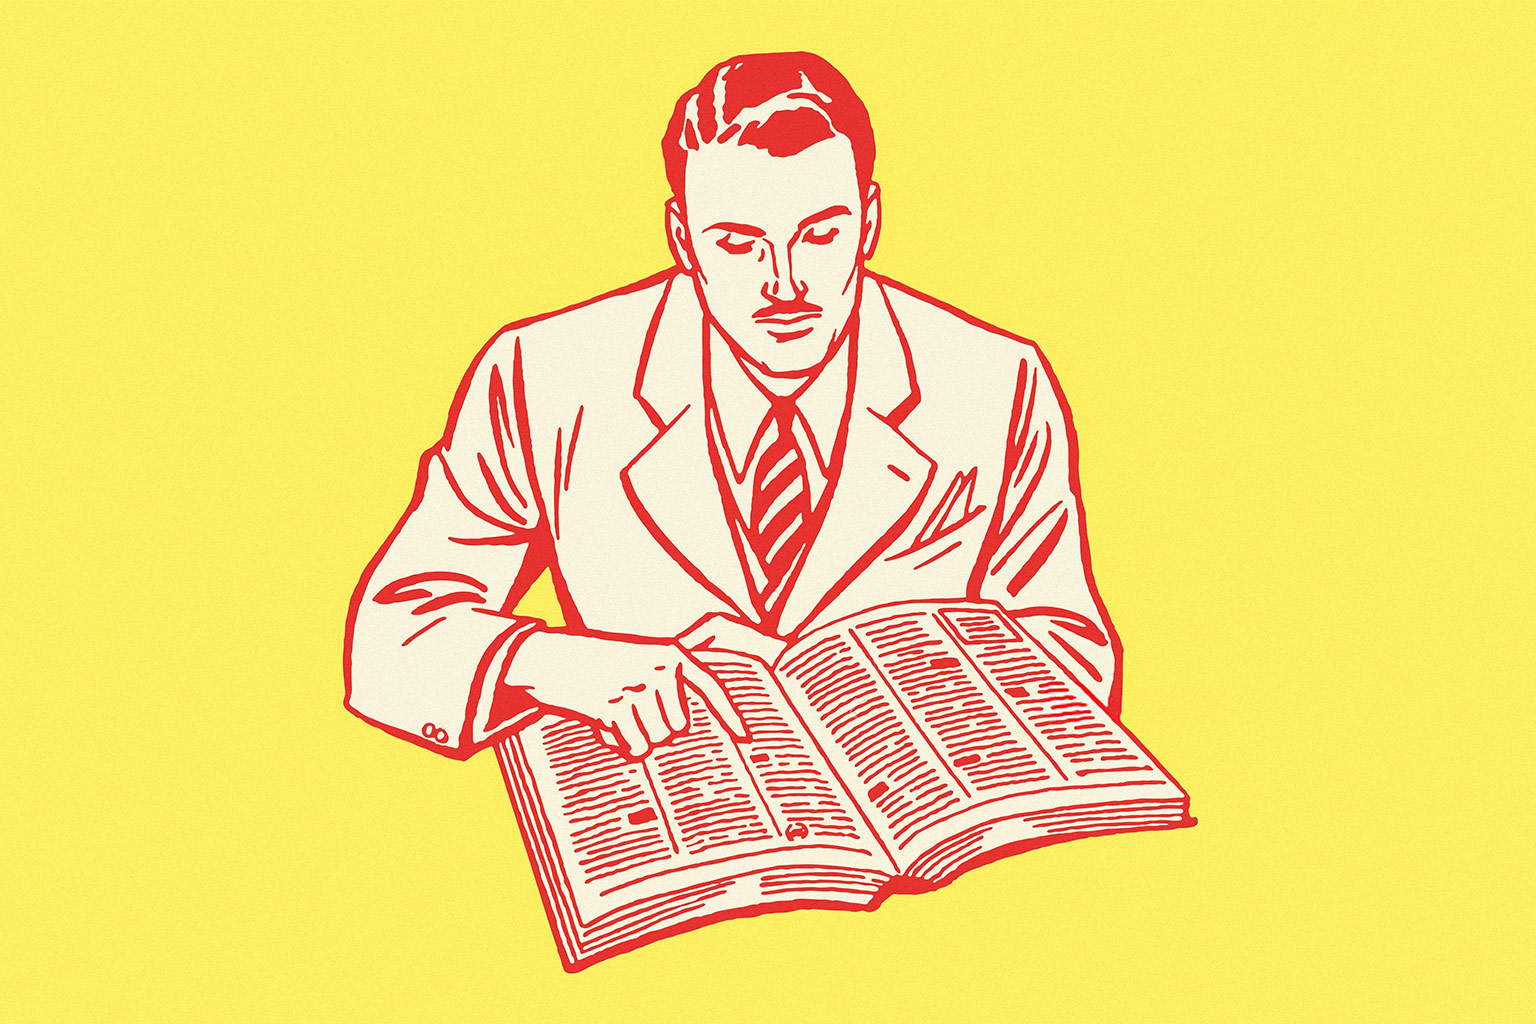 Man reading book vintage illustration with red and yellow colours